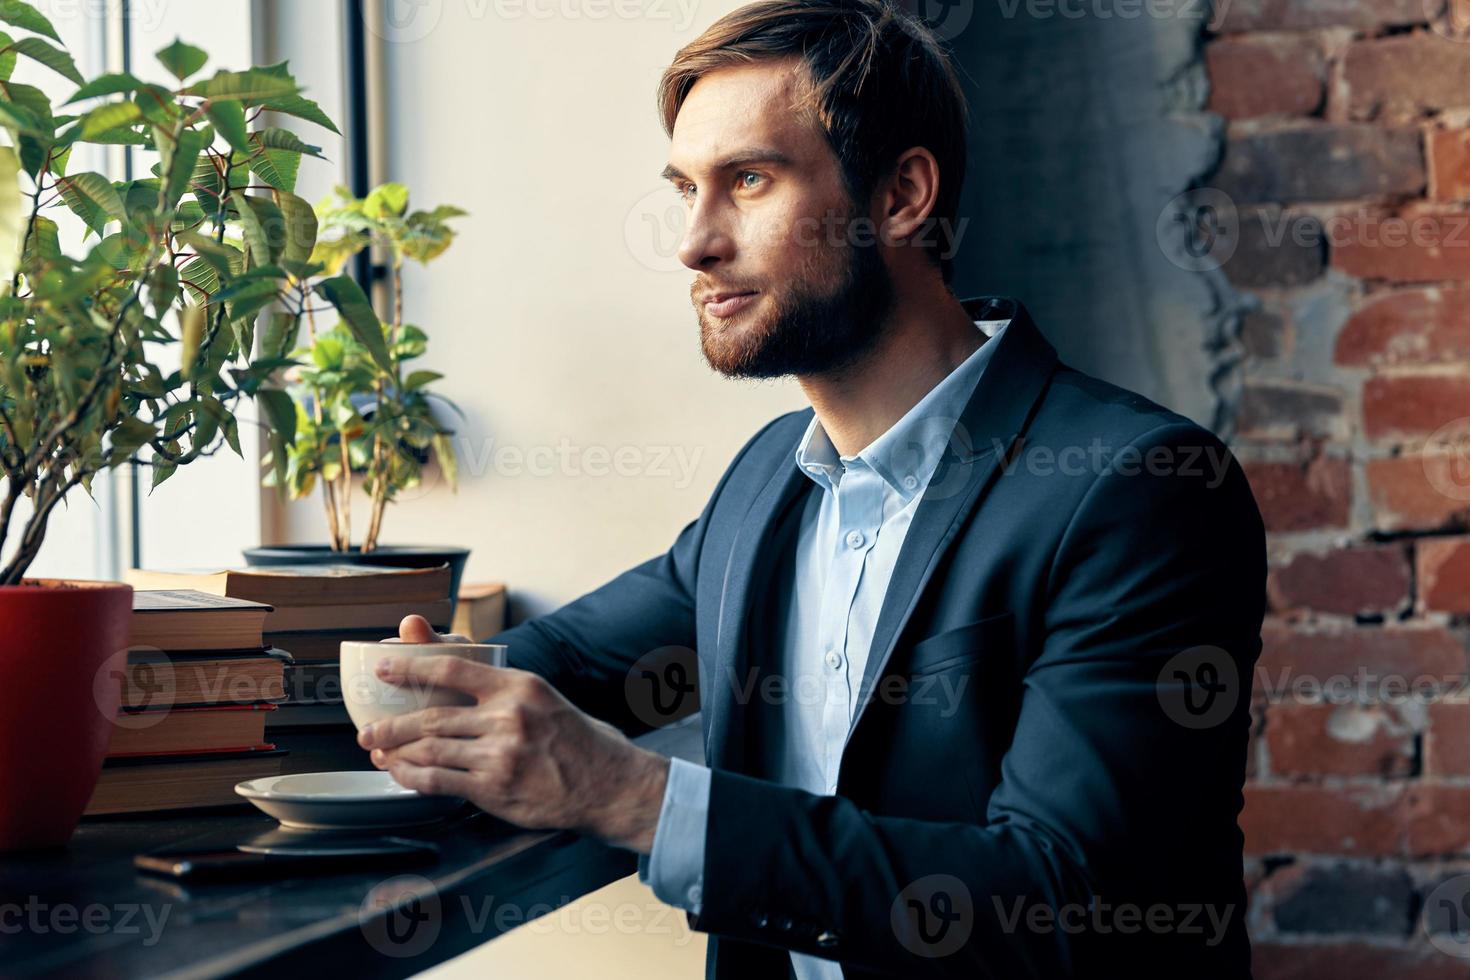 a man in a suit sitting in a cafe with a cup of coffee leisure Professional photo